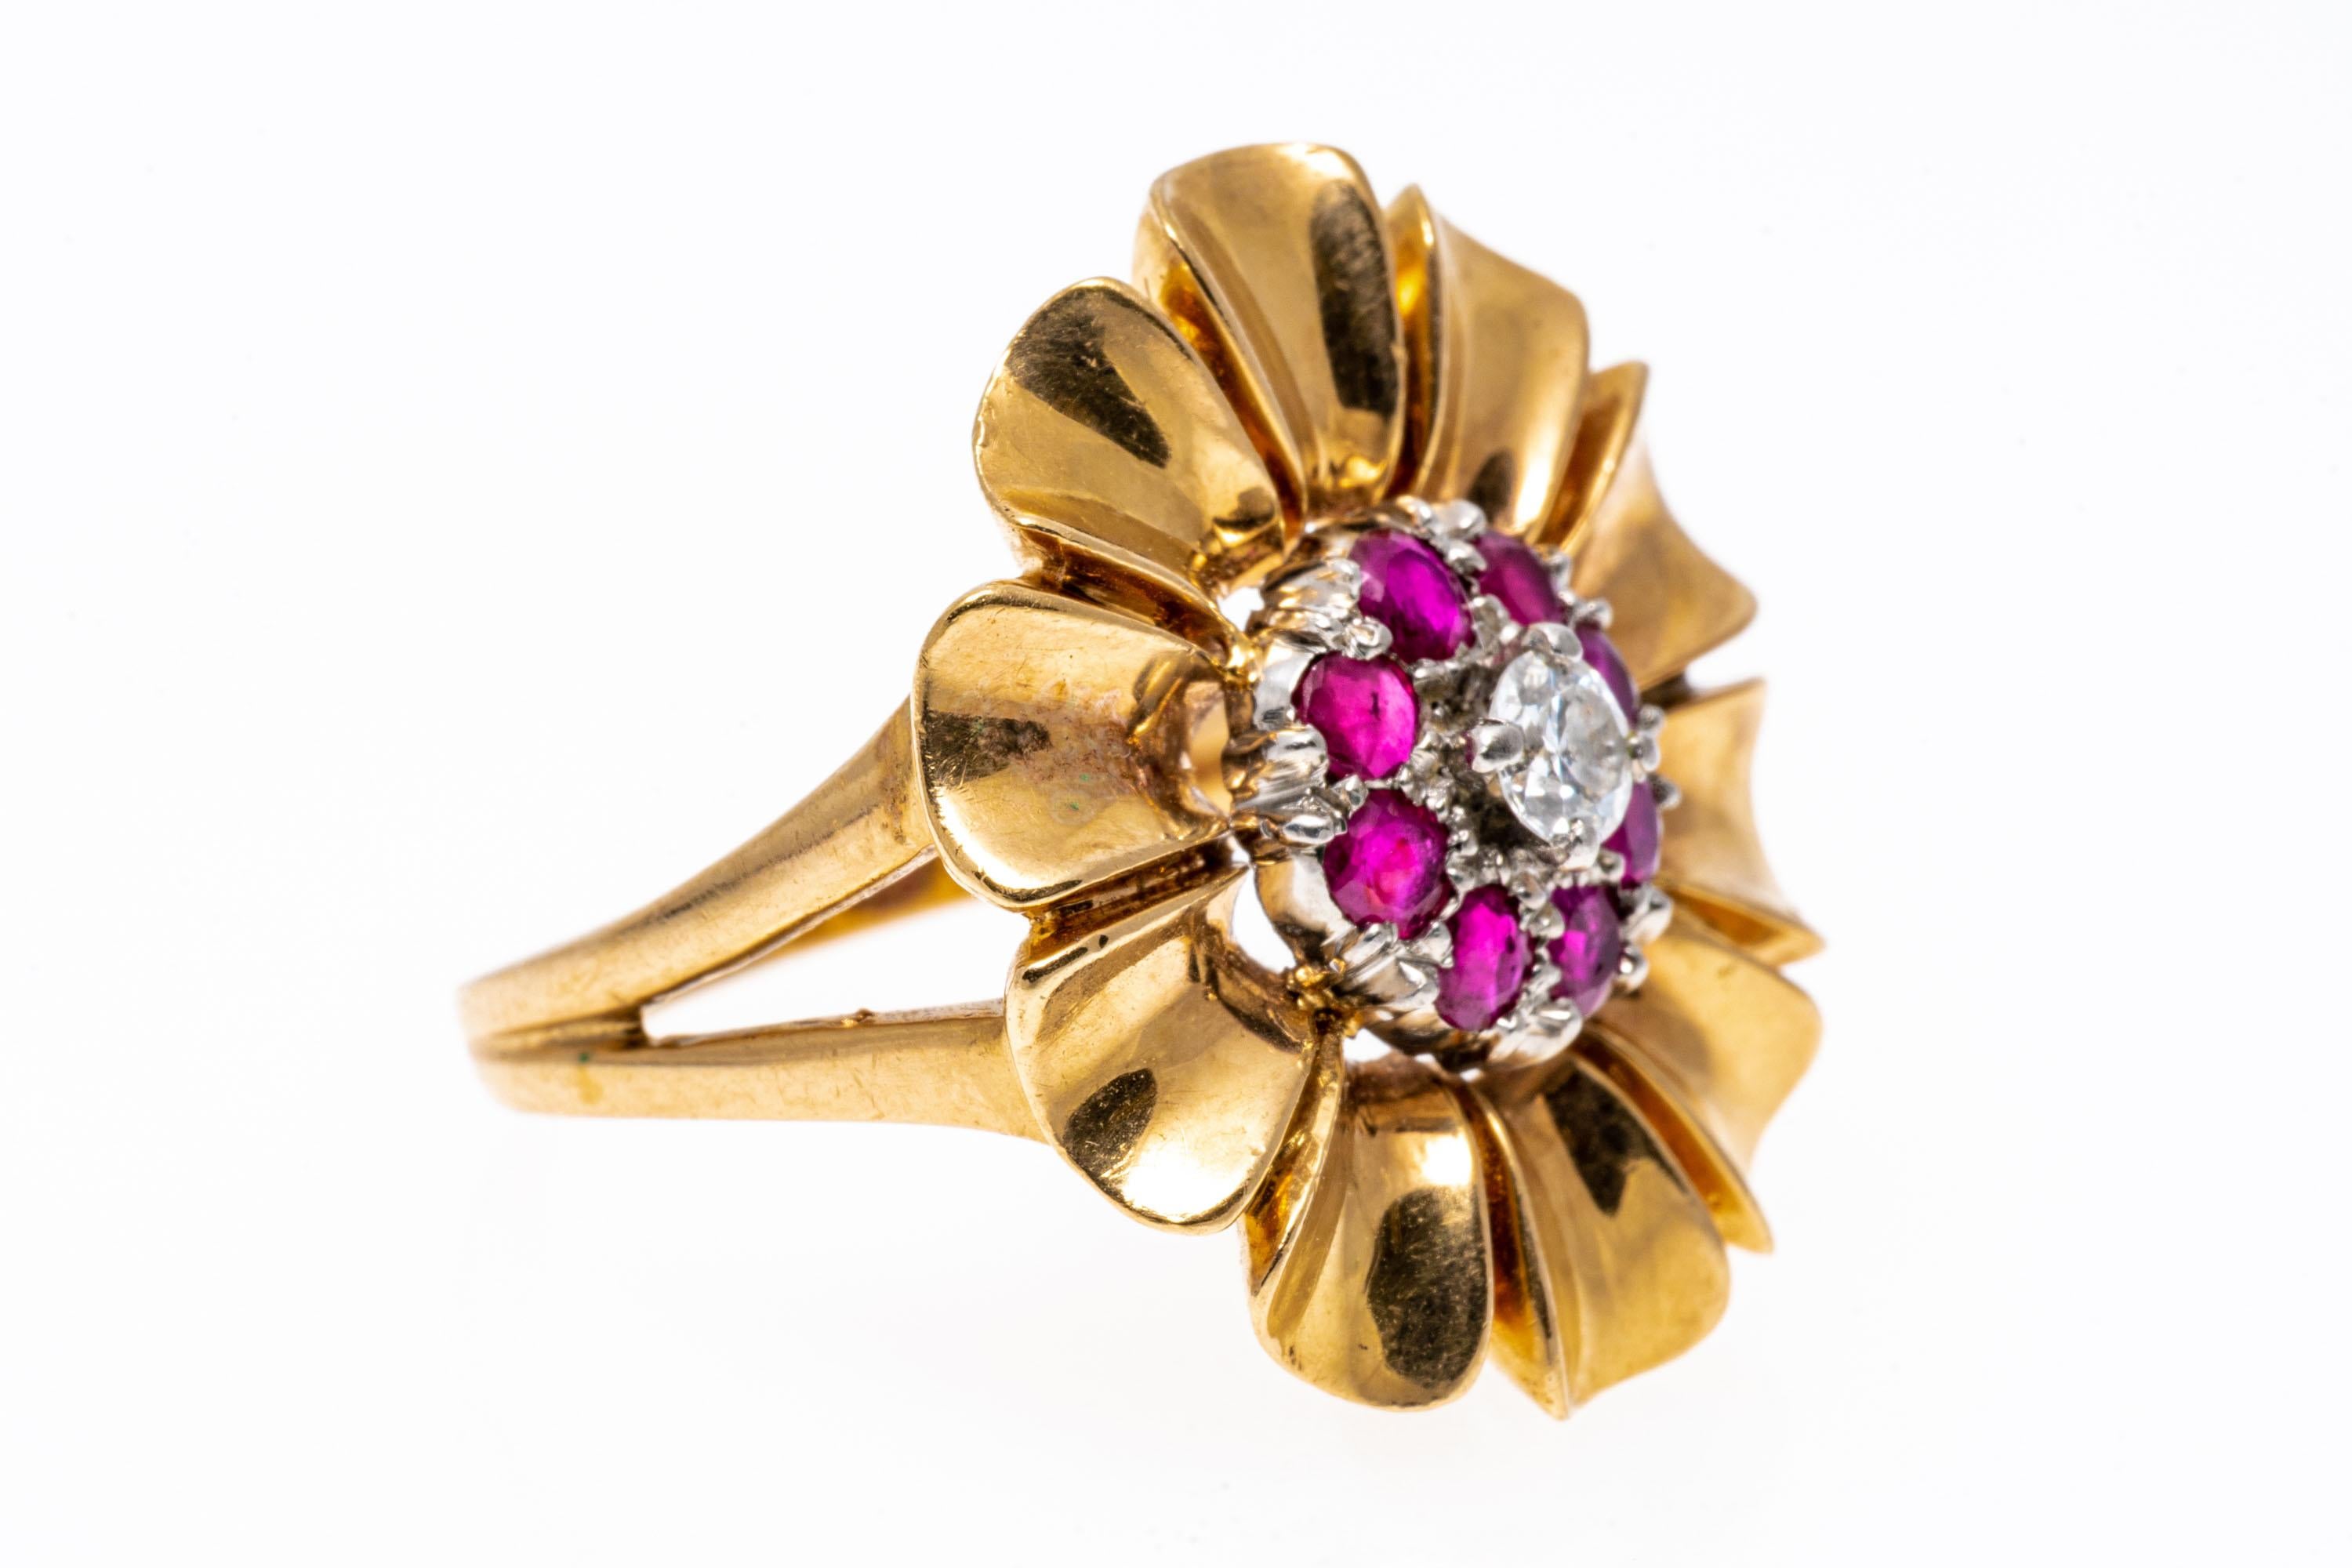 14k yellow gold ring. This beautiful retro flower motif ring features concave, highly polished petals, decorated in the center with a round brilliant cut diamond, approximately 0.10 CTS, framed with a round faceted, pinkish red color ruby halo,